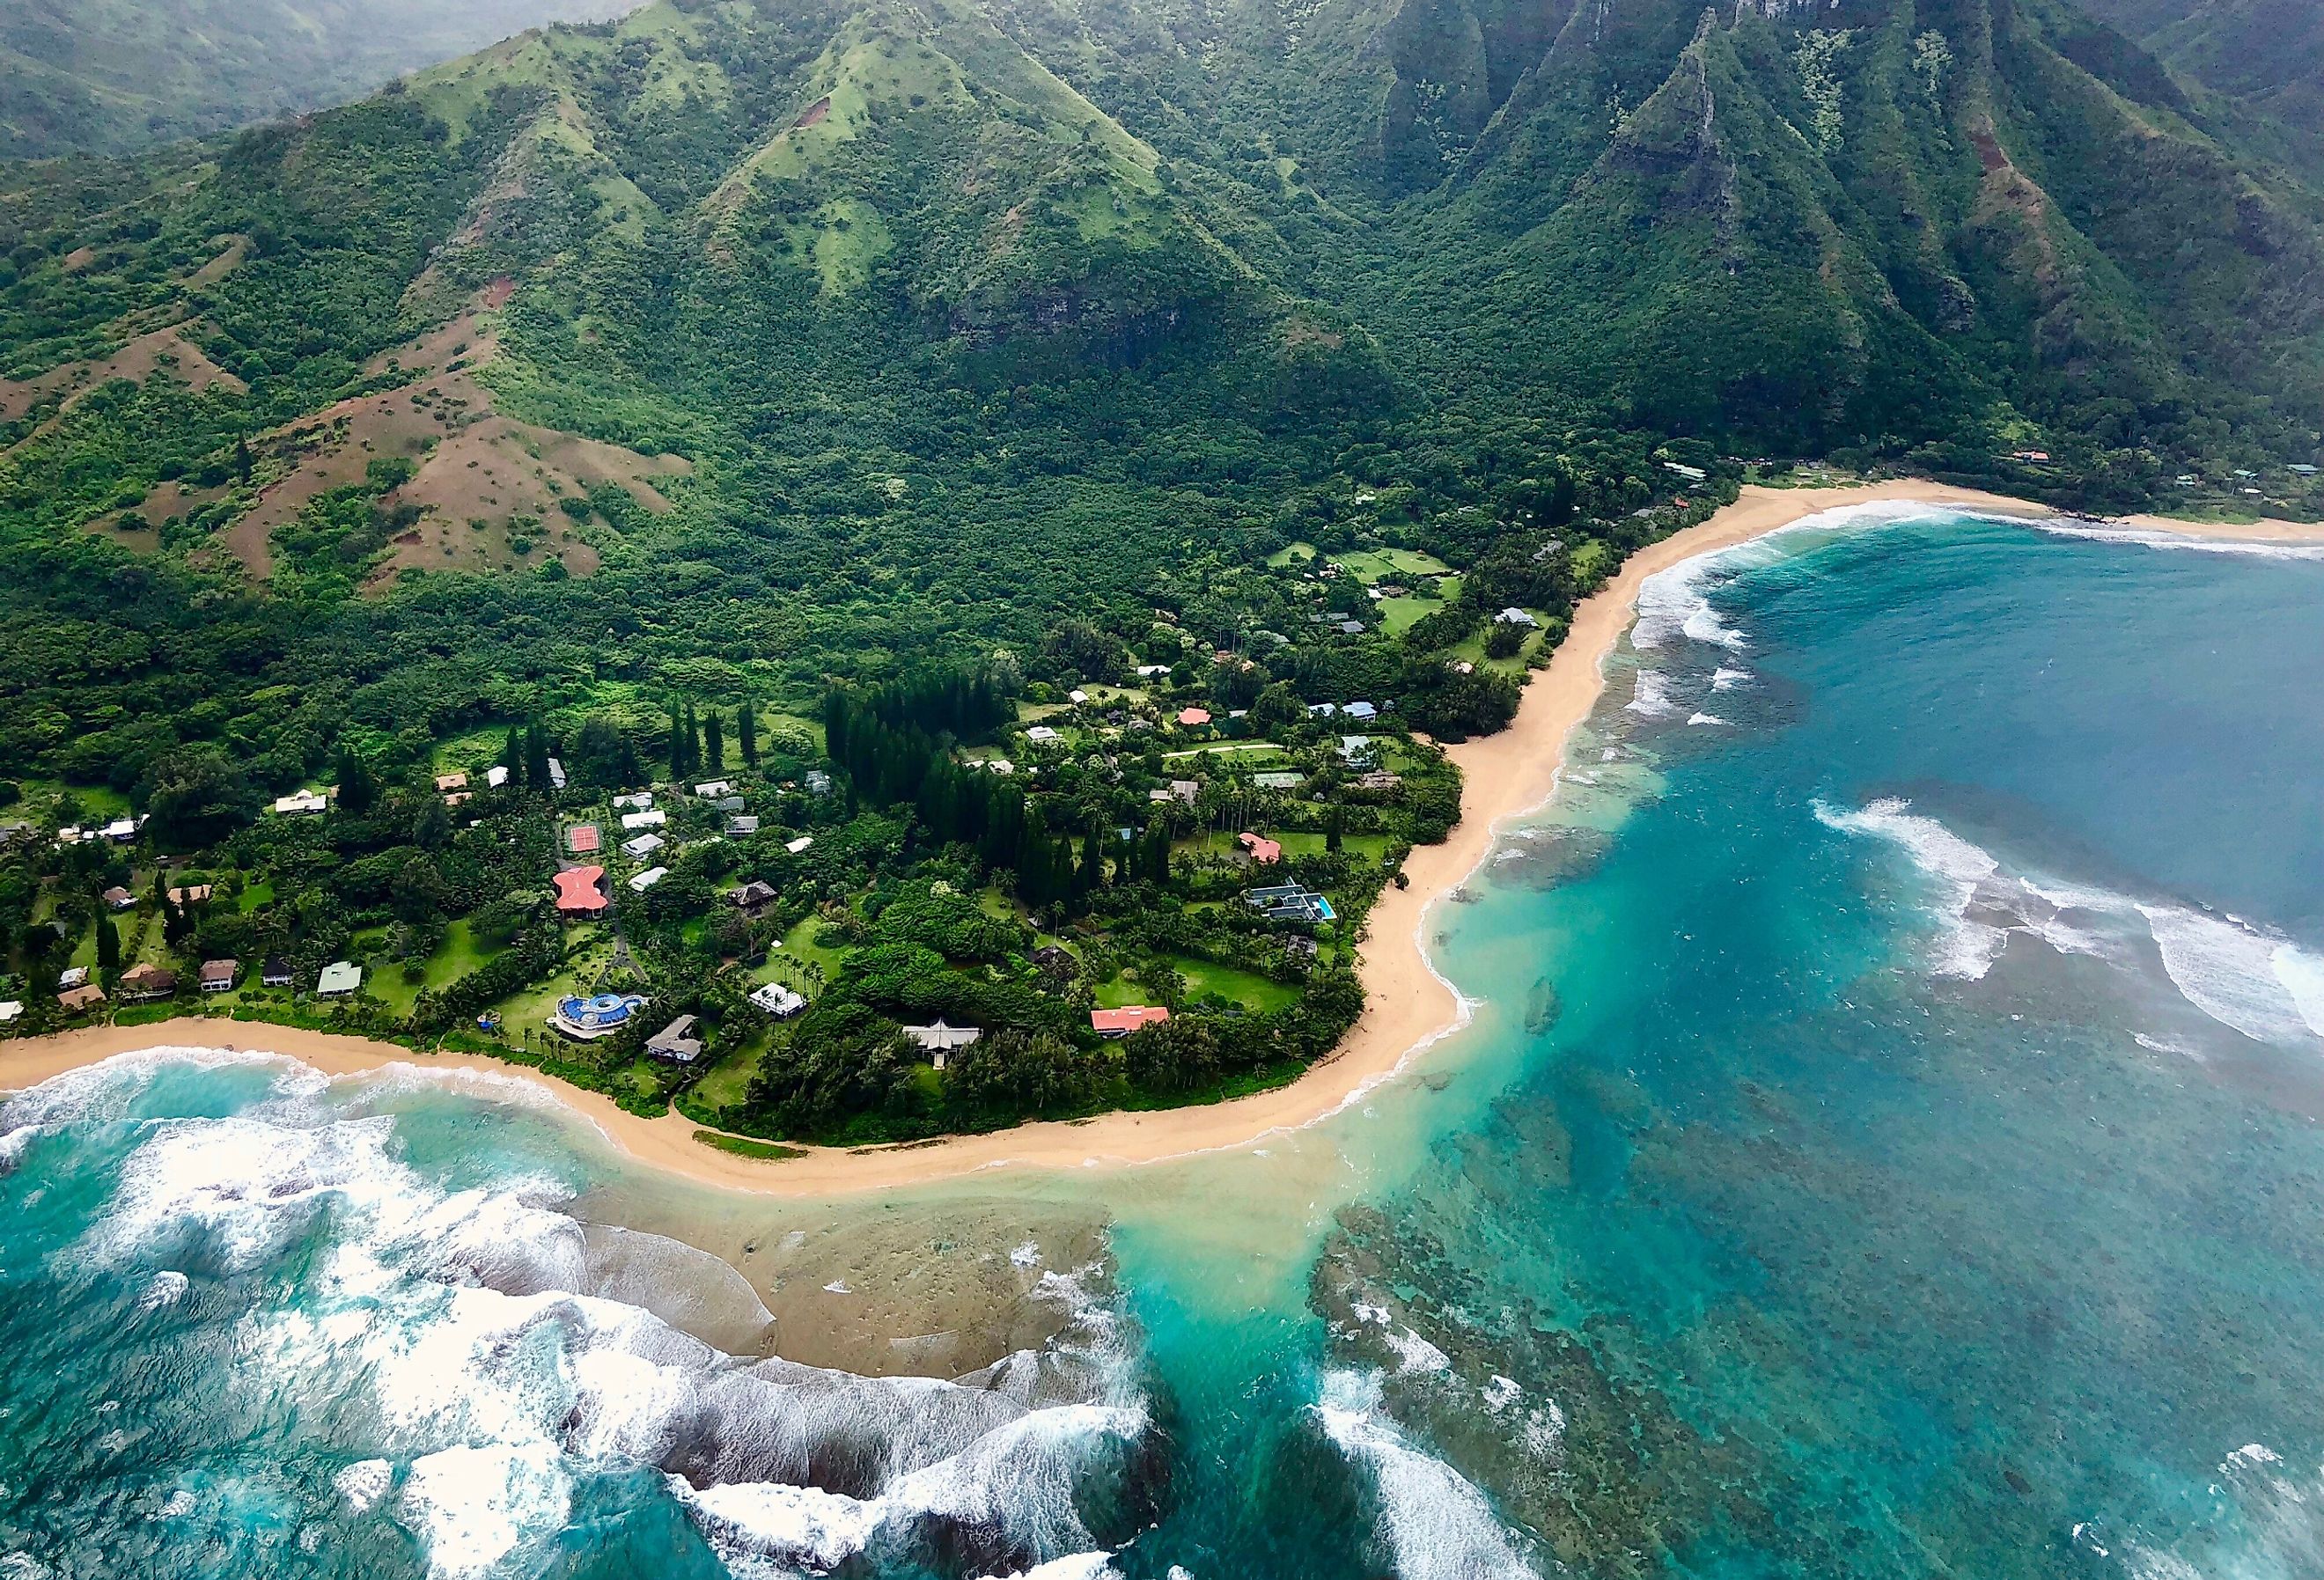 Homes along the sandy coast with mountains towering in the background in Hanapepe, Kauai, Hawaii.